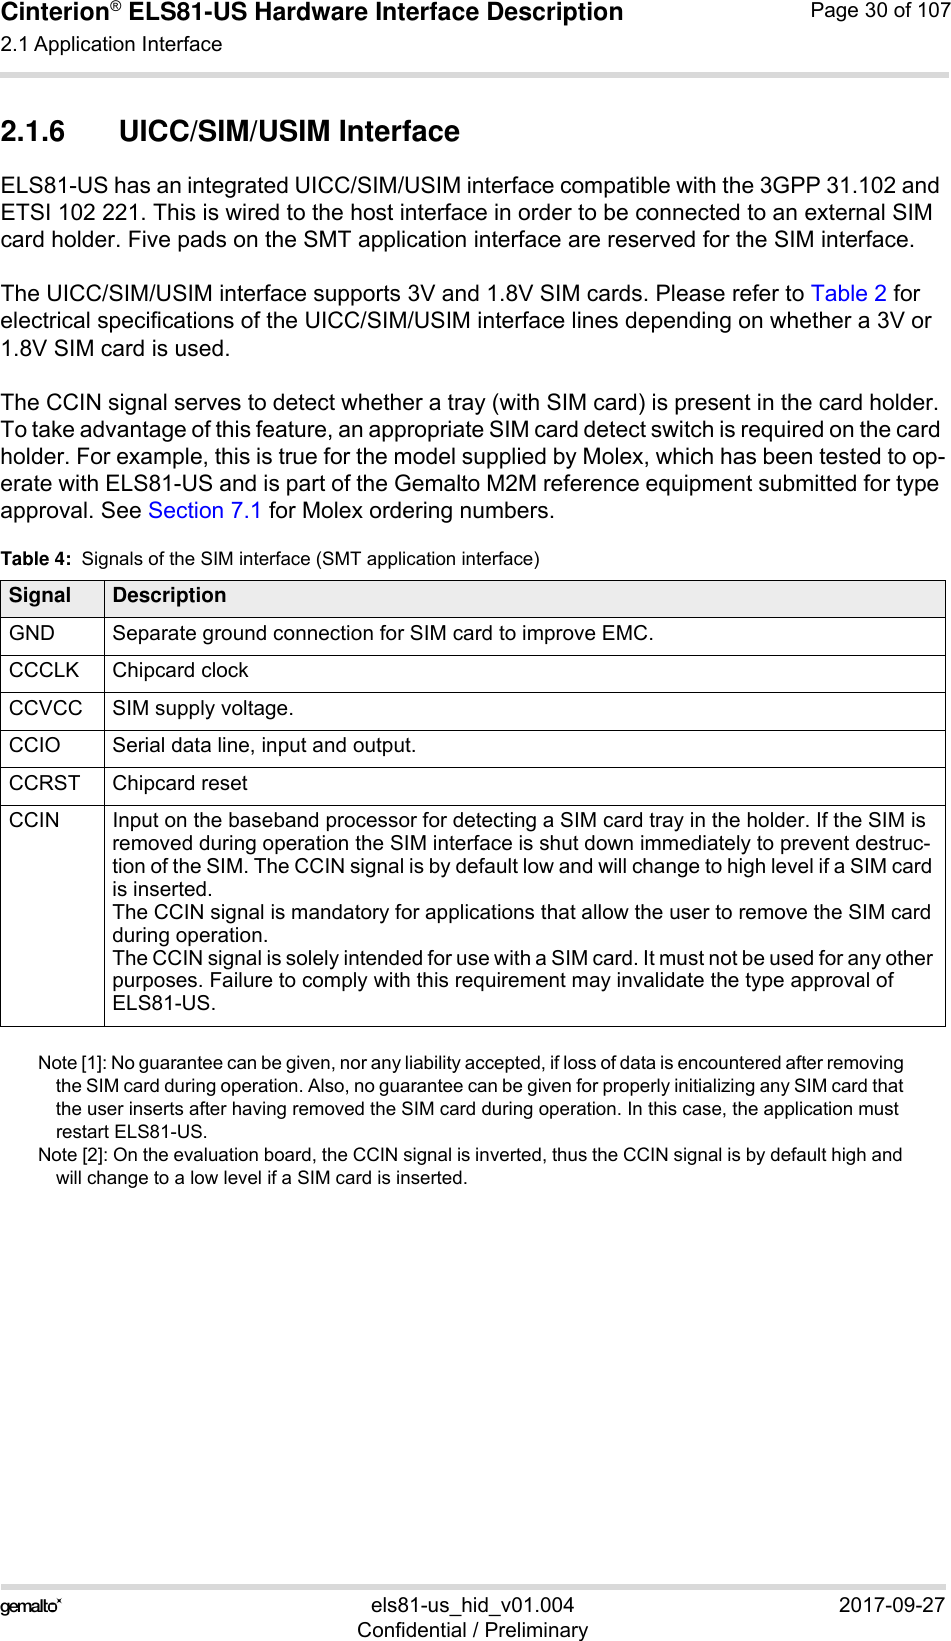 Cinterion® ELS81-US Hardware Interface Description2.1 Application Interface53els81-us_hid_v01.004 2017-09-27Confidential / PreliminaryPage 30 of 1072.1.6 UICC/SIM/USIM InterfaceELS81-US has an integrated UICC/SIM/USIM interface compatible with the 3GPP 31.102 and ETSI 102 221. This is wired to the host interface in order to be connected to an external SIM card holder. Five pads on the SMT application interface are reserved for the SIM interface. The UICC/SIM/USIM interface supports 3V and 1.8V SIM cards. Please refer to Table 2 for electrical specifications of the UICC/SIM/USIM interface lines depending on whether a 3V or 1.8V SIM card is used.The CCIN signal serves to detect whether a tray (with SIM card) is present in the card holder. To take advantage of this feature, an appropriate SIM card detect switch is required on the card holder. For example, this is true for the model supplied by Molex, which has been tested to op-erate with ELS81-US and is part of the Gemalto M2M reference equipment submitted for type approval. See Section 7.1 for Molex ordering numbers.Note [1]: No guarantee can be given, nor any liability accepted, if loss of data is encountered after removing the SIM card during operation. Also, no guarantee can be given for properly initializing any SIM card that the user inserts after having removed the SIM card during operation. In this case, the application must restart ELS81-US.Note [2]: On the evaluation board, the CCIN signal is inverted, thus the CCIN signal is by default high and will change to a low level if a SIM card is inserted. Table 4:  Signals of the SIM interface (SMT application interface)Signal DescriptionGND Separate ground connection for SIM card to improve EMC.CCCLK Chipcard clockCCVCC SIM supply voltage.CCIO Serial data line, input and output.CCRST Chipcard resetCCIN Input on the baseband processor for detecting a SIM card tray in the holder. If the SIM is removed during operation the SIM interface is shut down immediately to prevent destruc-tion of the SIM. The CCIN signal is by default low and will change to high level if a SIM card is inserted.The CCIN signal is mandatory for applications that allow the user to remove the SIM card during operation. The CCIN signal is solely intended for use with a SIM card. It must not be used for any other purposes. Failure to comply with this requirement may invalidate the type approval of ELS81-US.